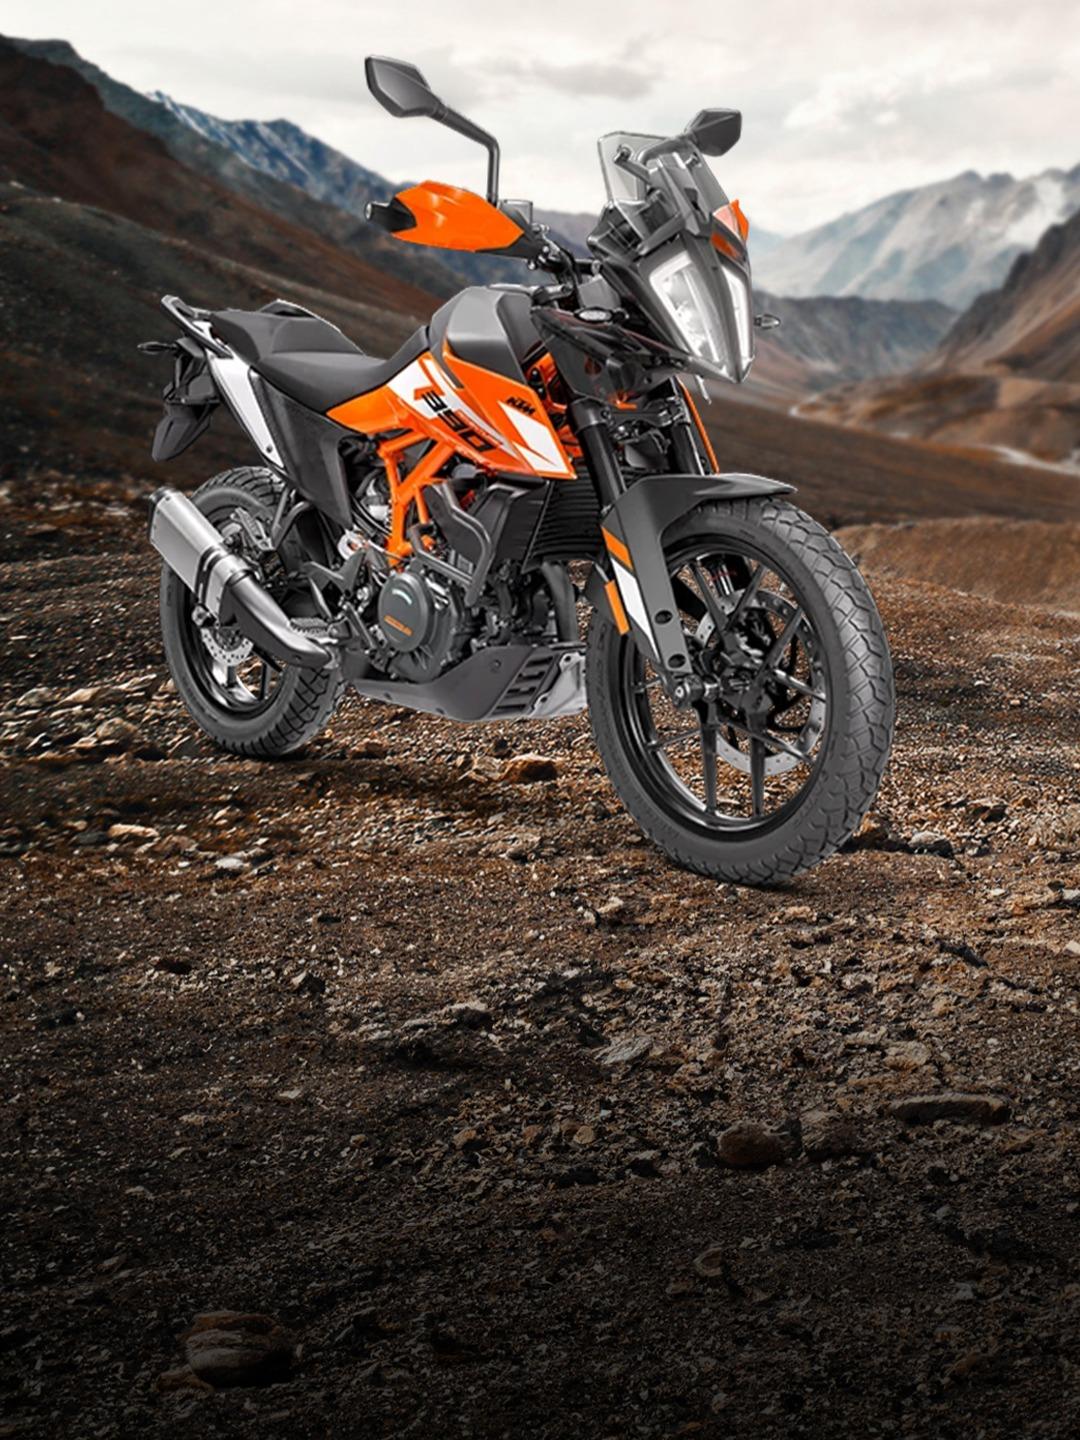 New KTM 390 ADV Spied Testing; Two Variants On Offer